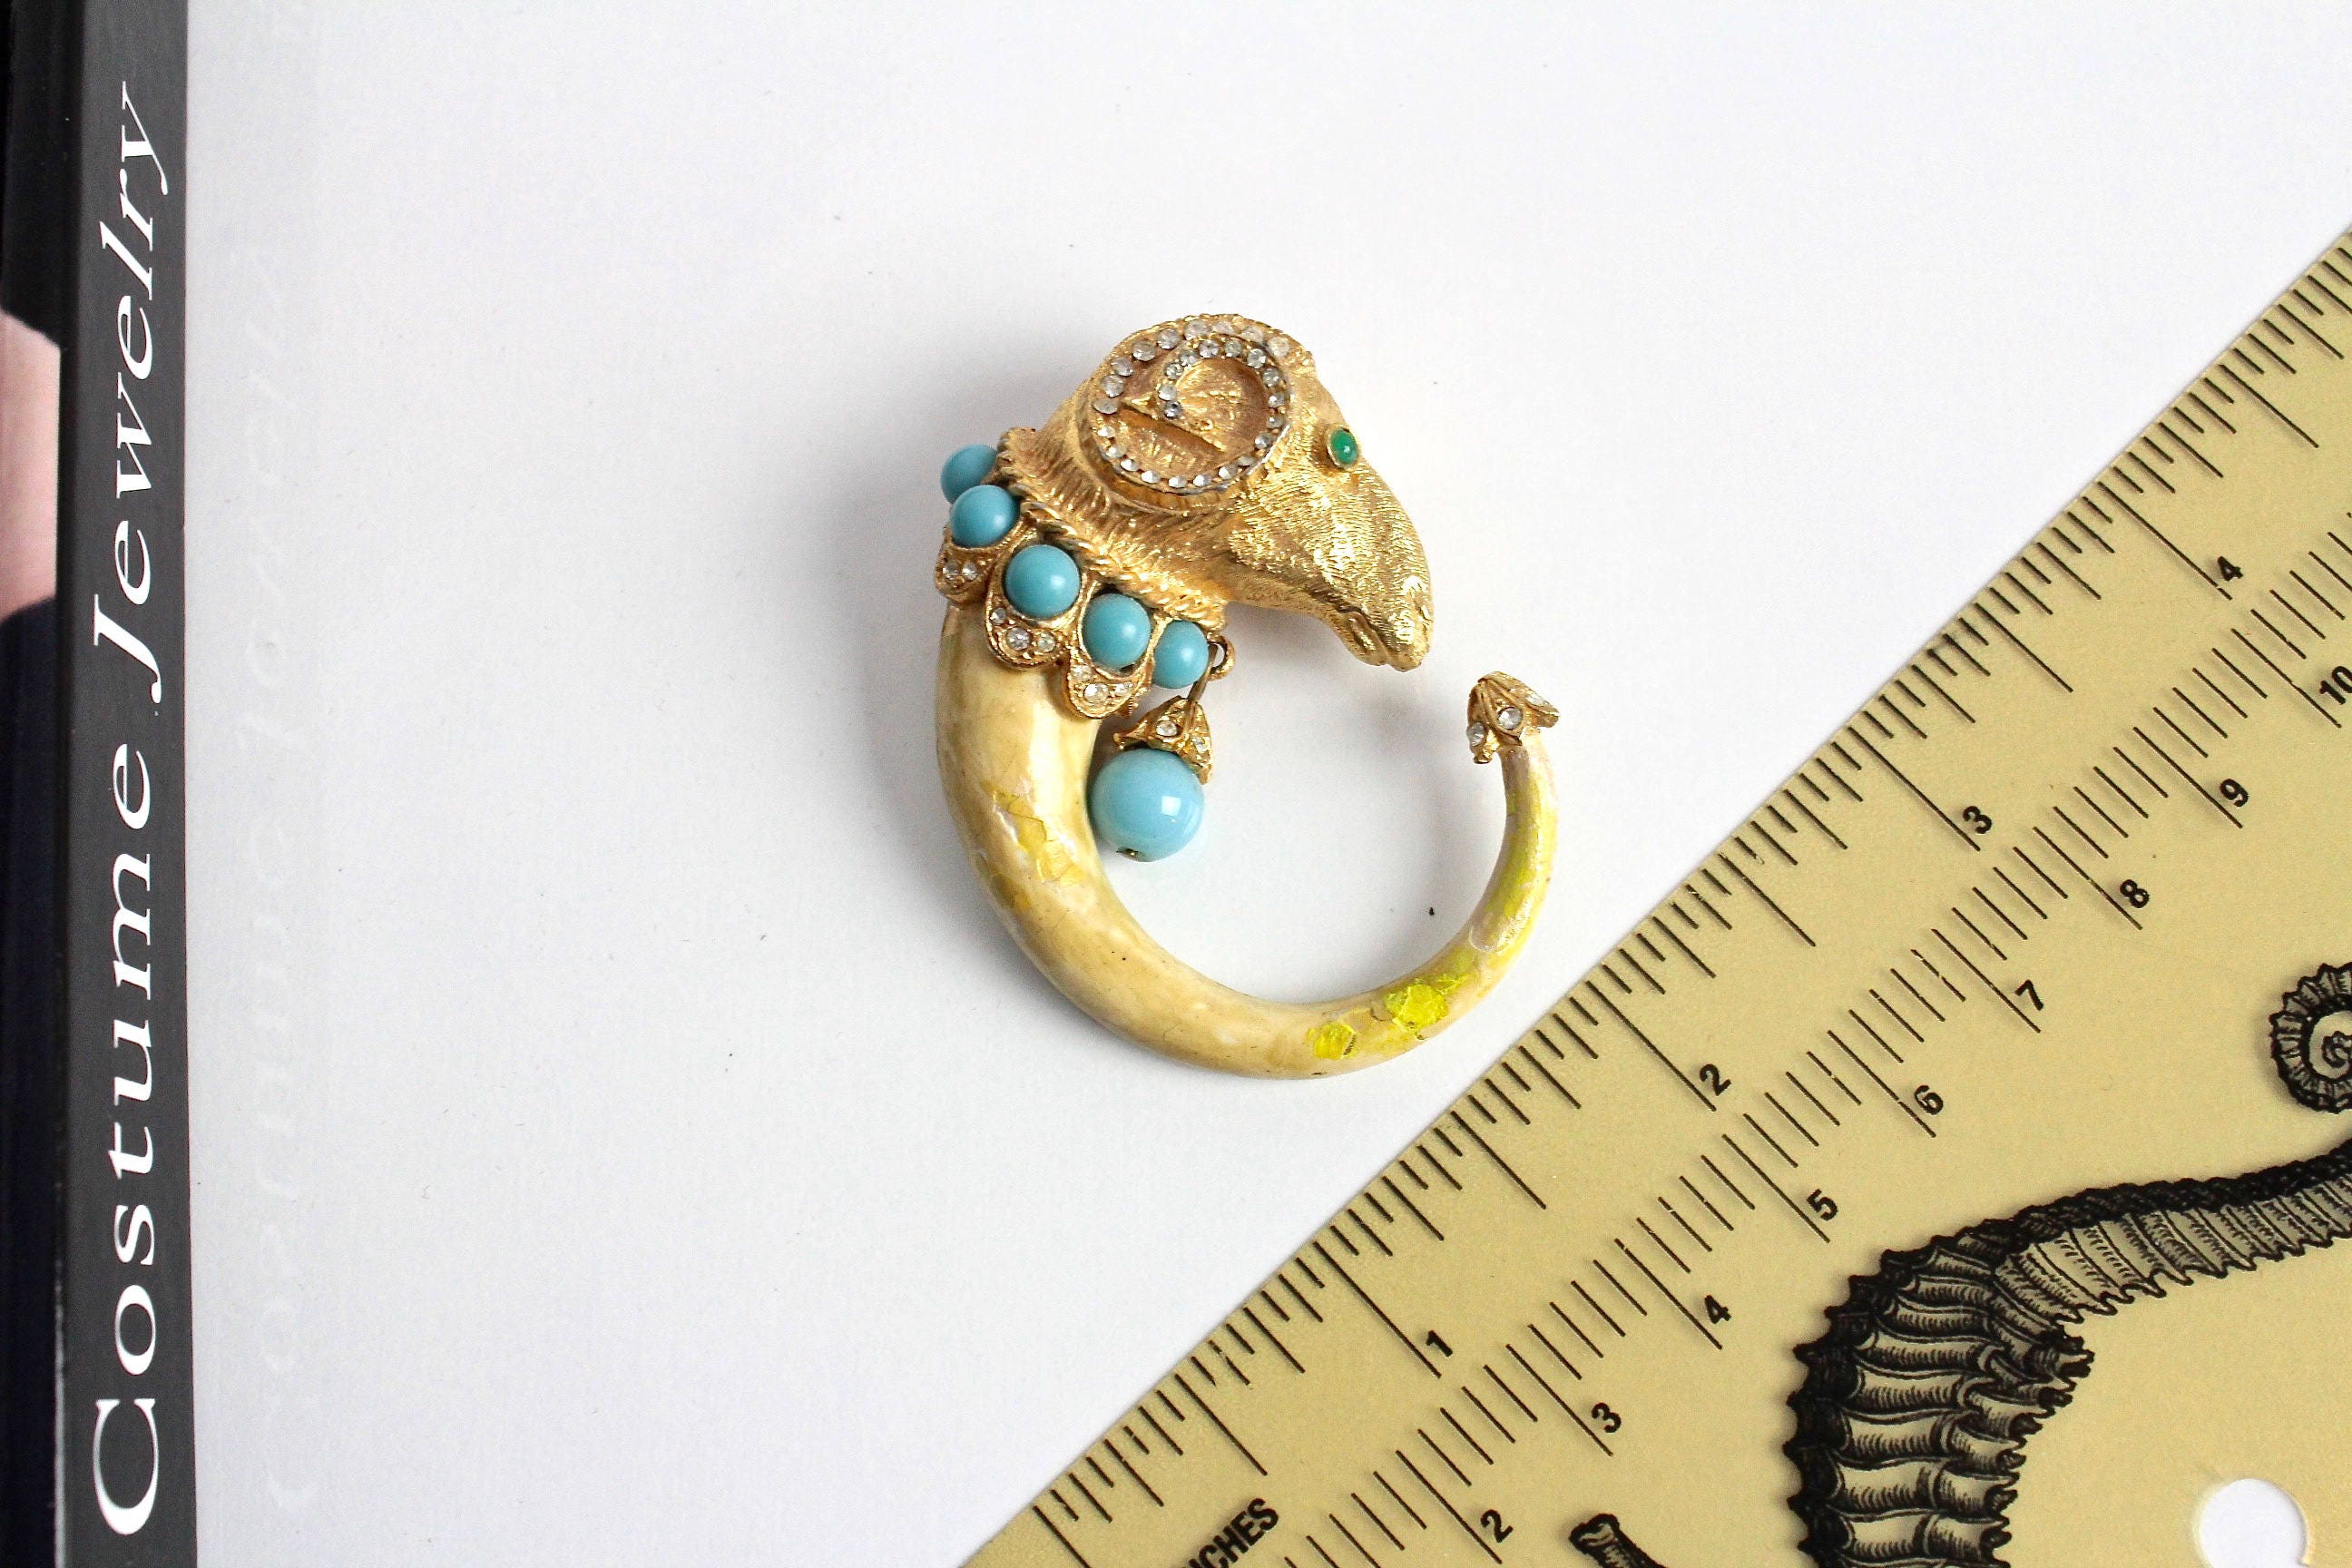 1950S Cadoro Enamel Ram Aries Zodiac Brooch/Pin With Faux Turquoise & Clear Rhinestones/ Rare Vintage Brooch #1678